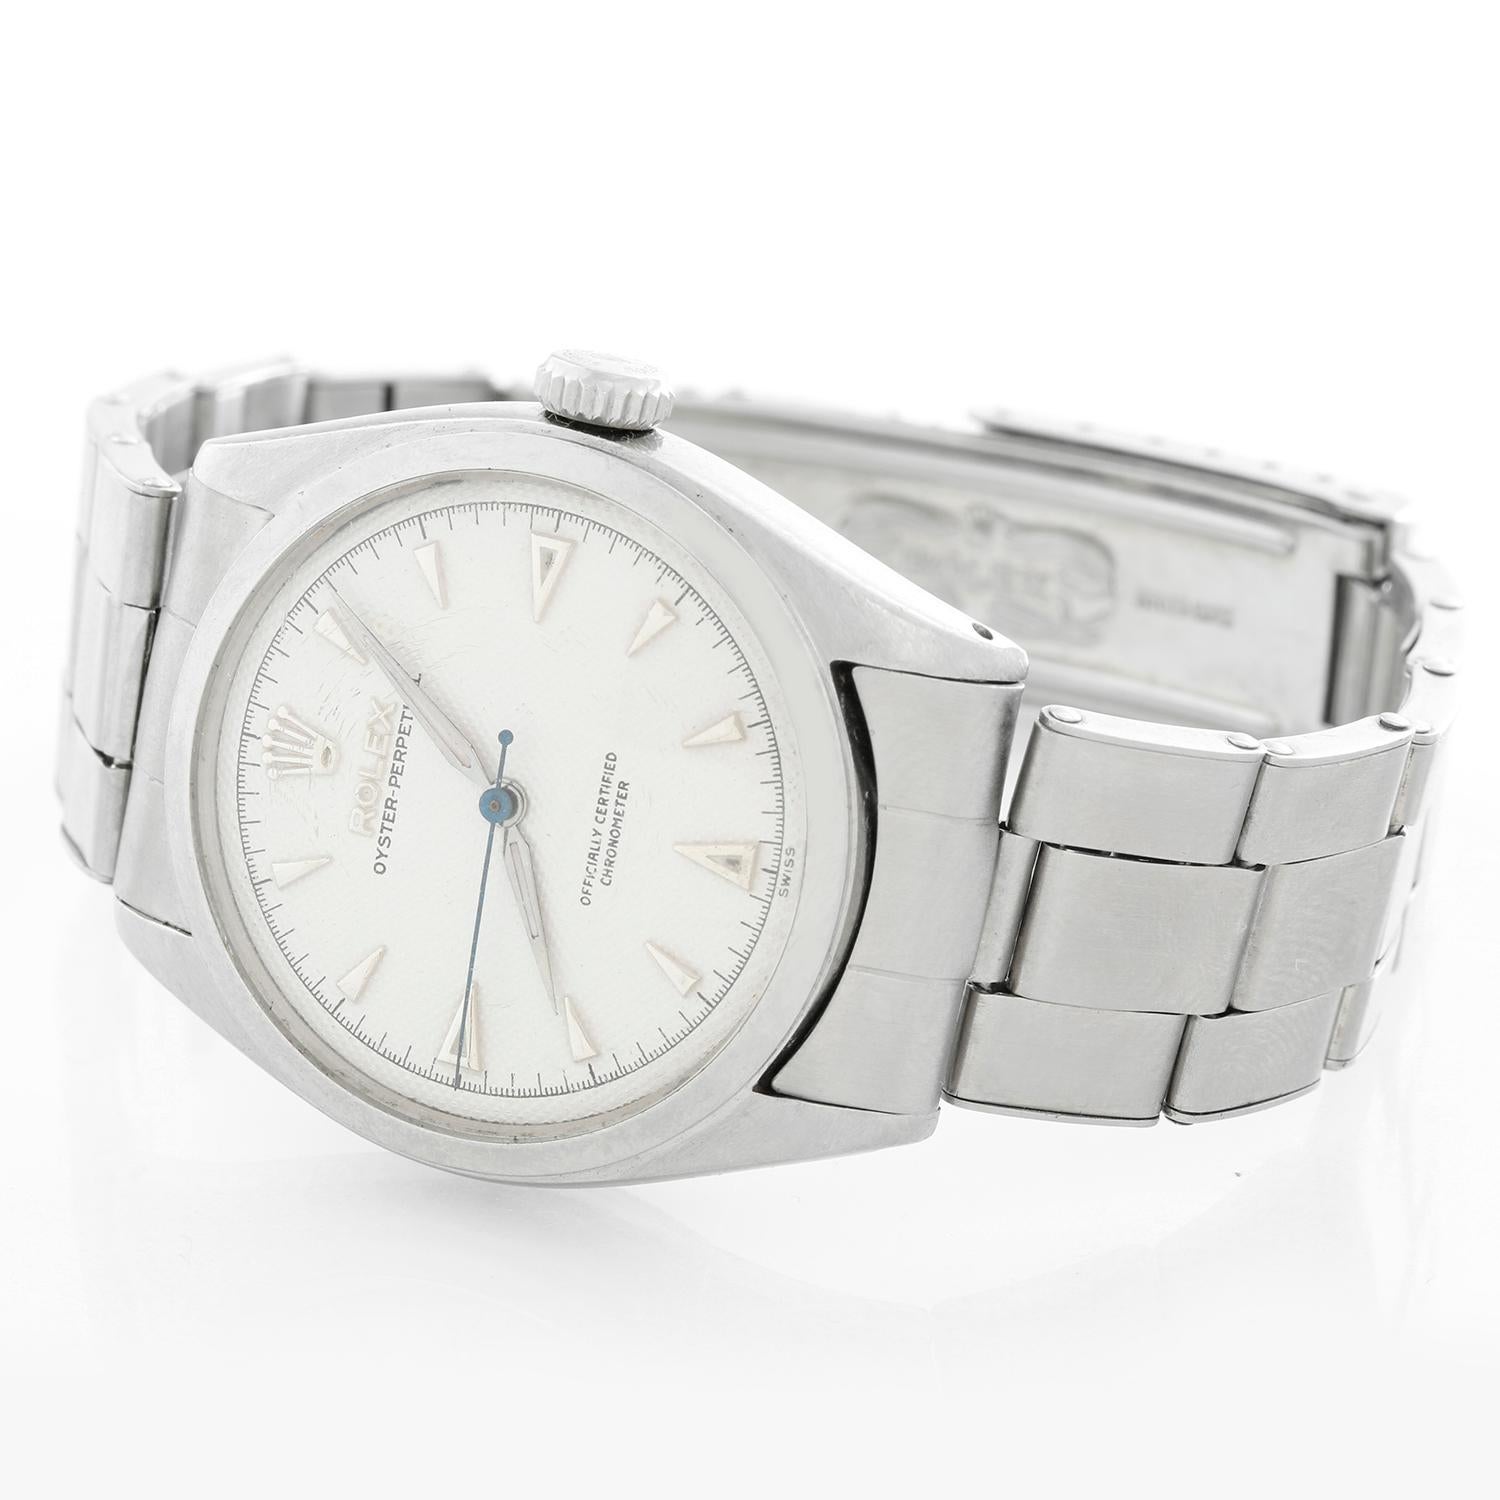 Vintage Rolex Oyster Perpetual Stainless Steel Men's Watch Ref. 6084 - Automatic winding. Stainless steel case with smooth bezel ( 34 mm ). White guilloche dial  with luminous hour markers. Stainless Steel Oyster bracelet; will fit up to a 7 1/4